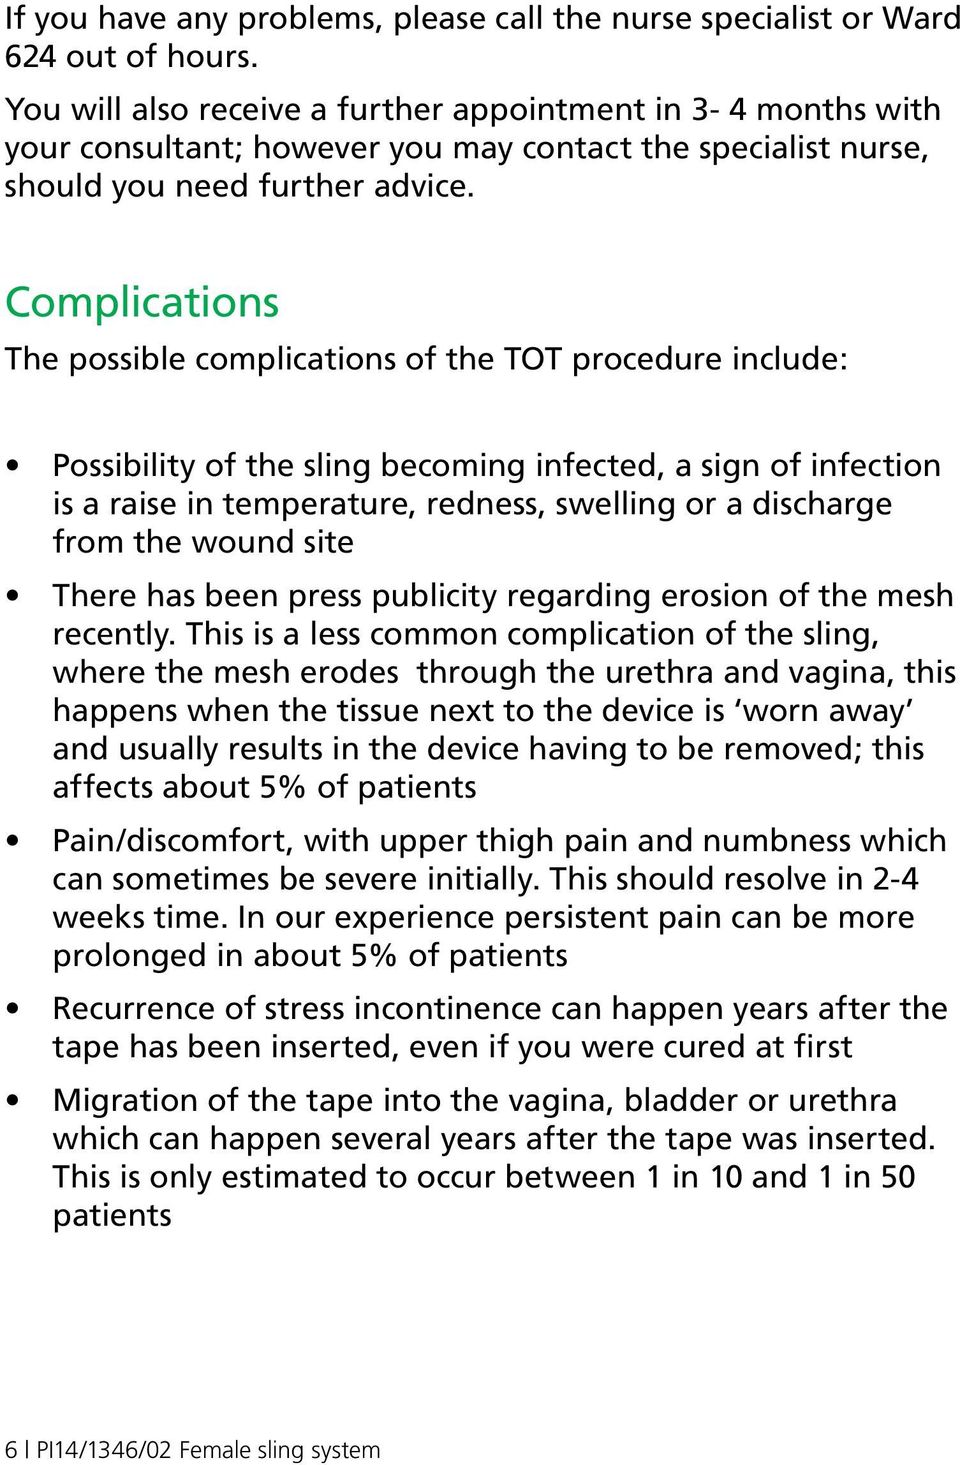 Complications The possible complications of the TOT procedure include: Possibility of the sling becoming infected, a sign of infection is a raise in temperature, redness, swelling or a discharge from